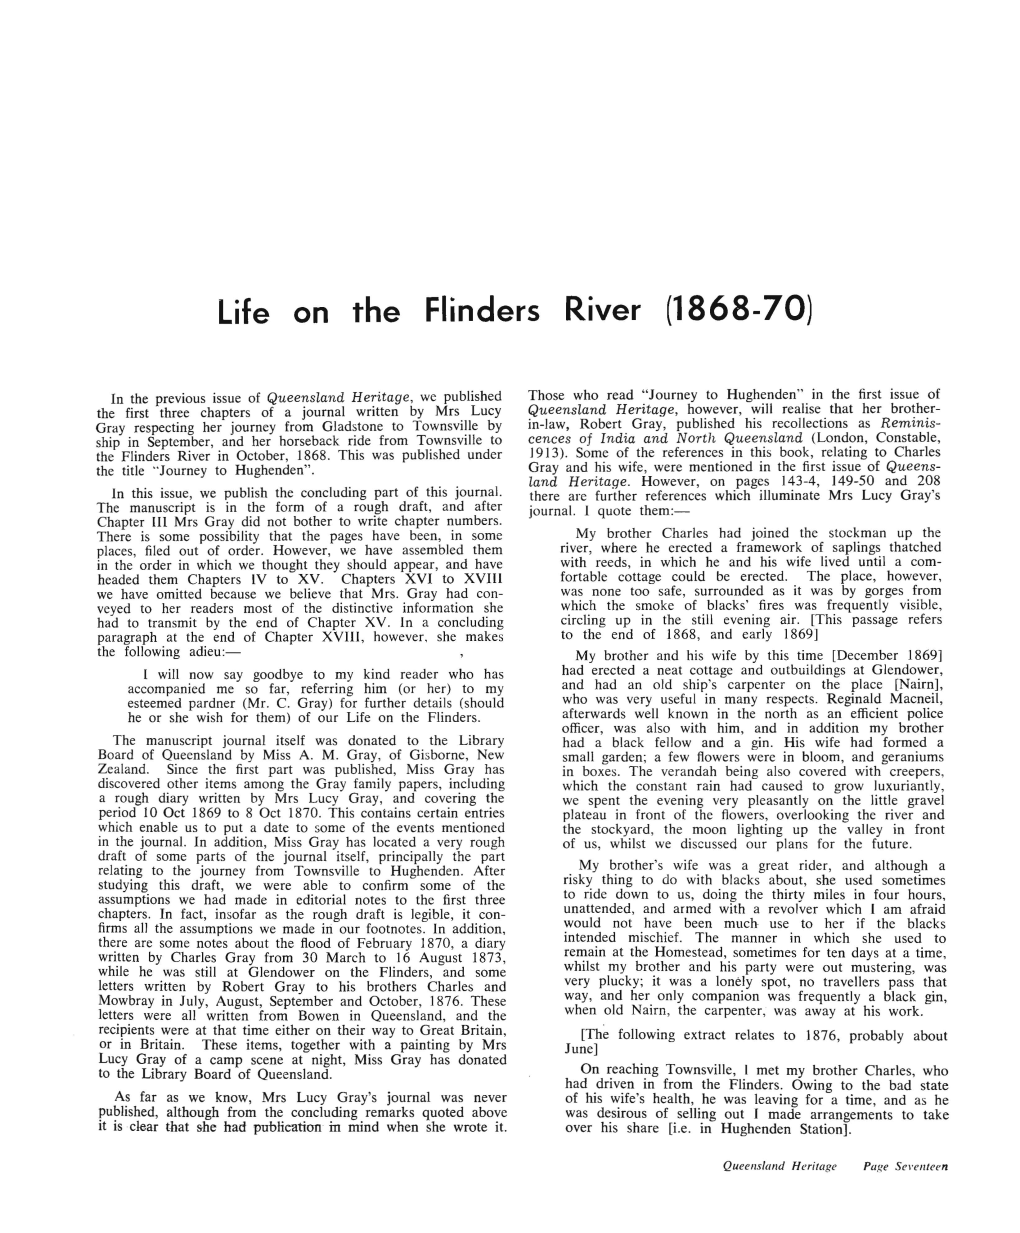 Life on the Flinders River (1868-70)